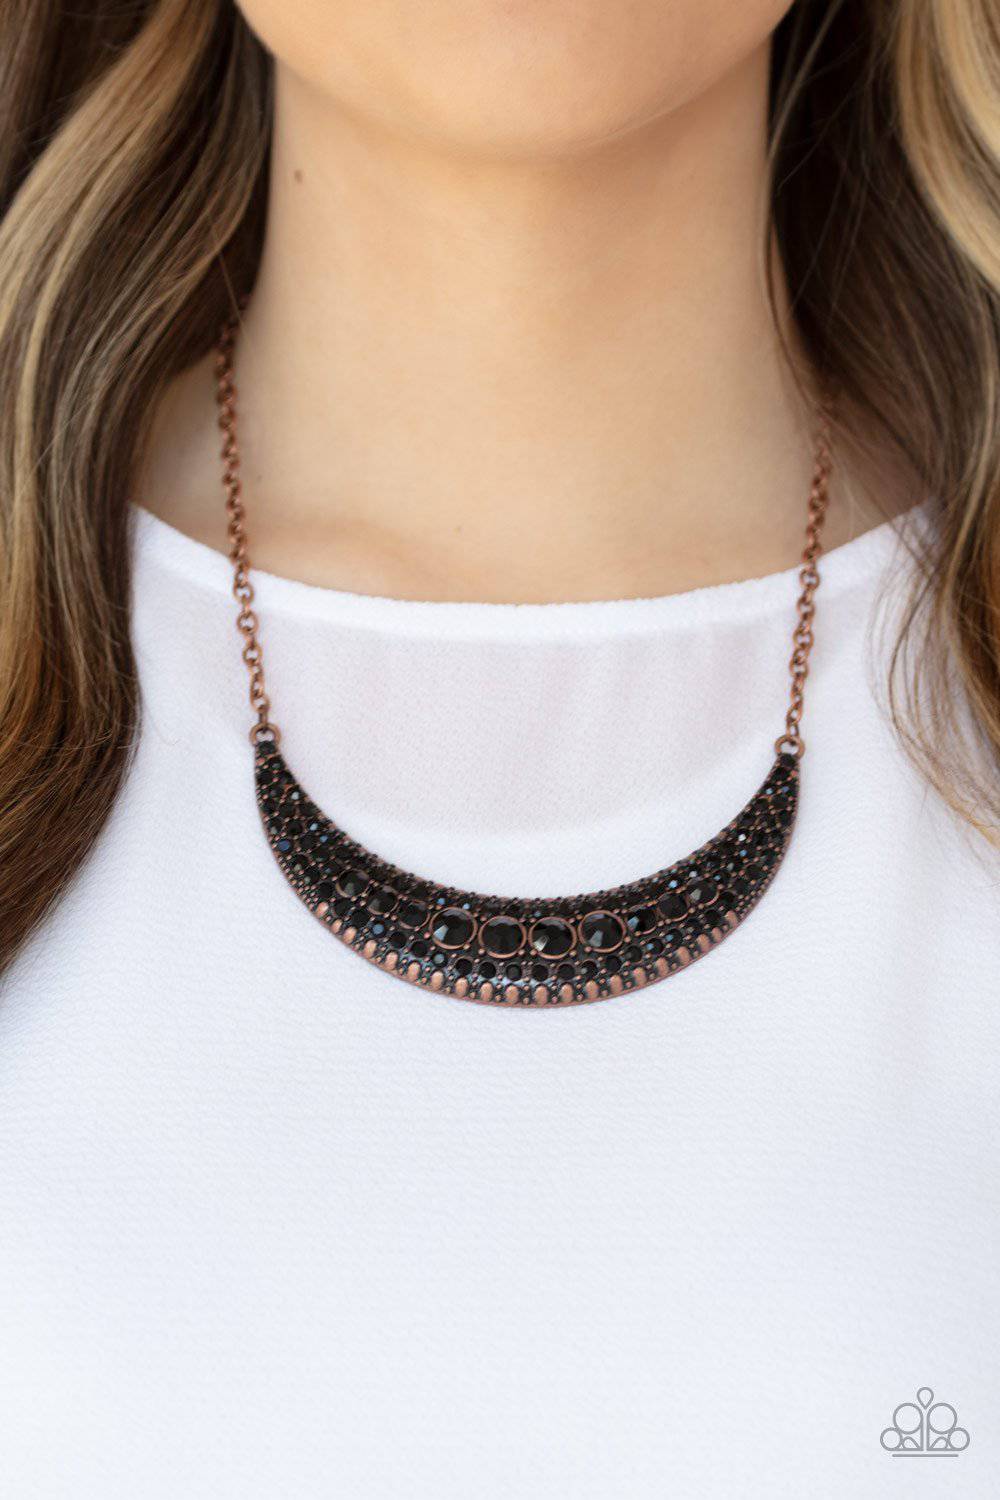 A164 - Moon Child Magic Copper Necklace by Paparazzi Accessories on Fancy5Fashion.com